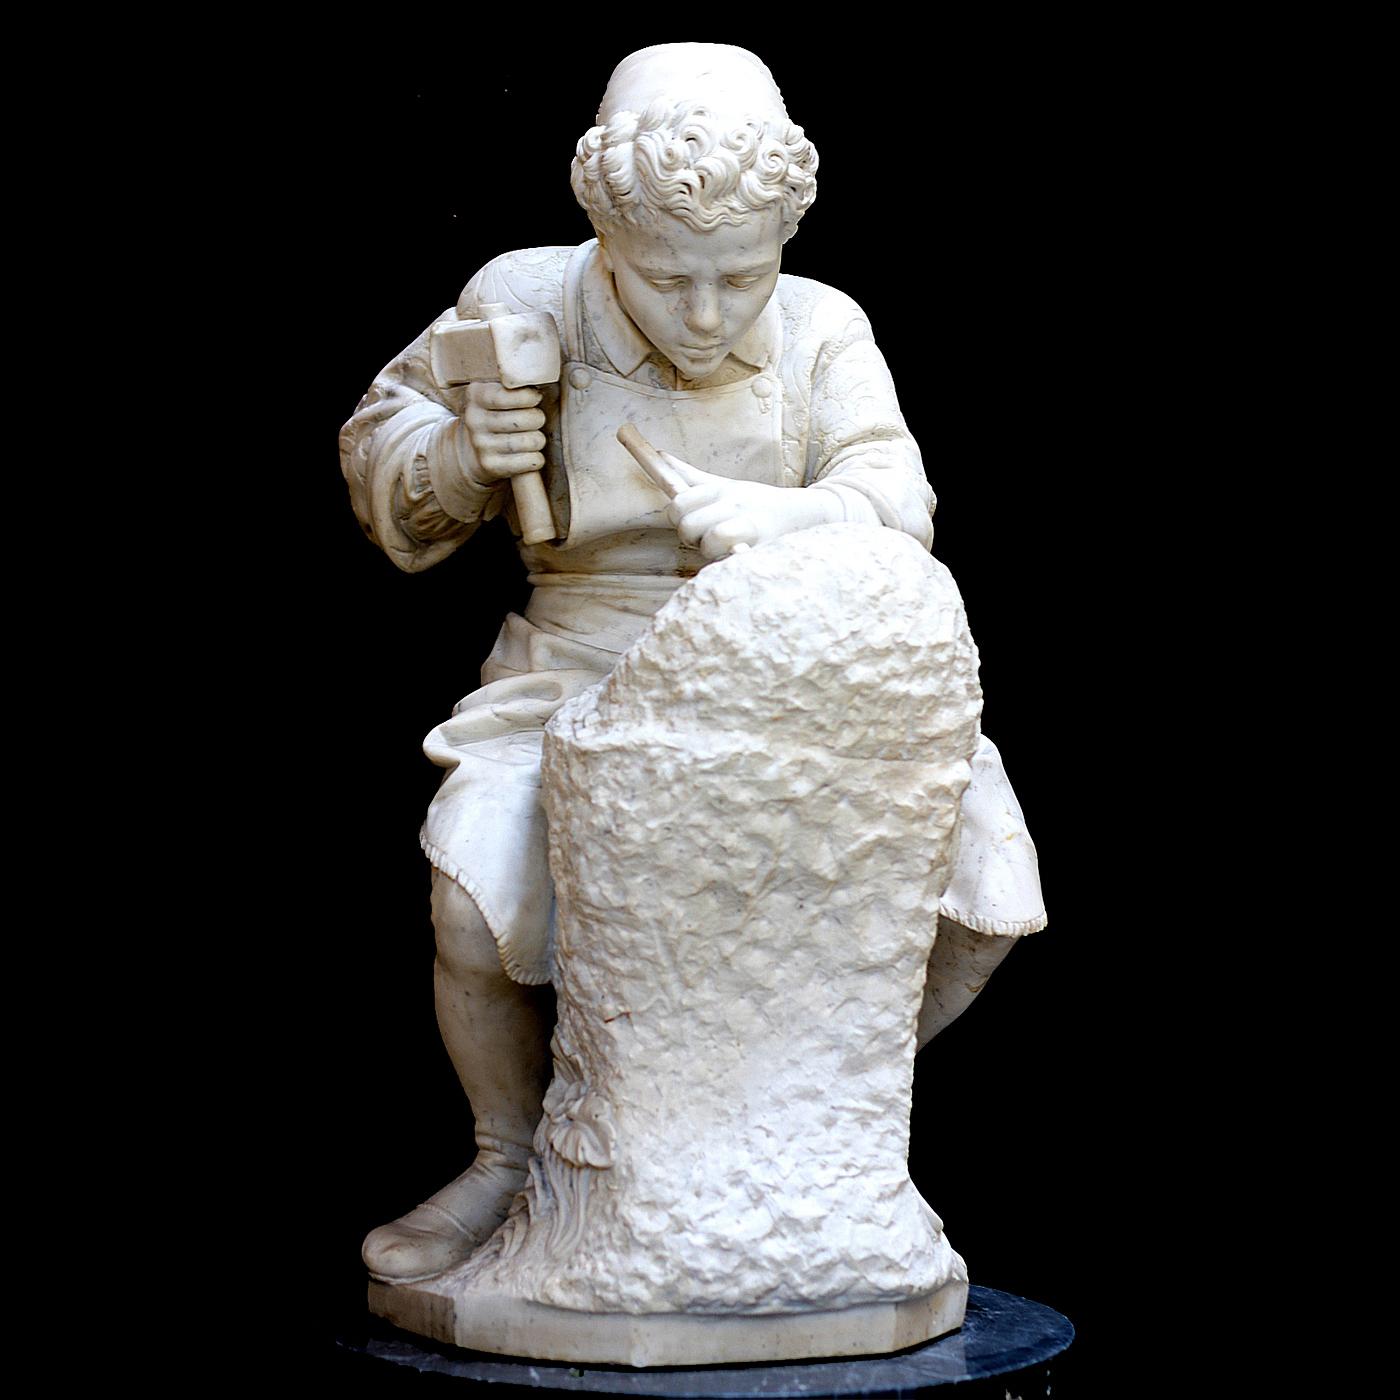 This sculpture is a high-quality replica of Emilio Zocchi's famous sculpture. The piece portrays a well-known episode in the life of a young, 15 year-old Michelangelo, when he copied the head of an ancient fawn figure. Lorenzo de' Medici was so